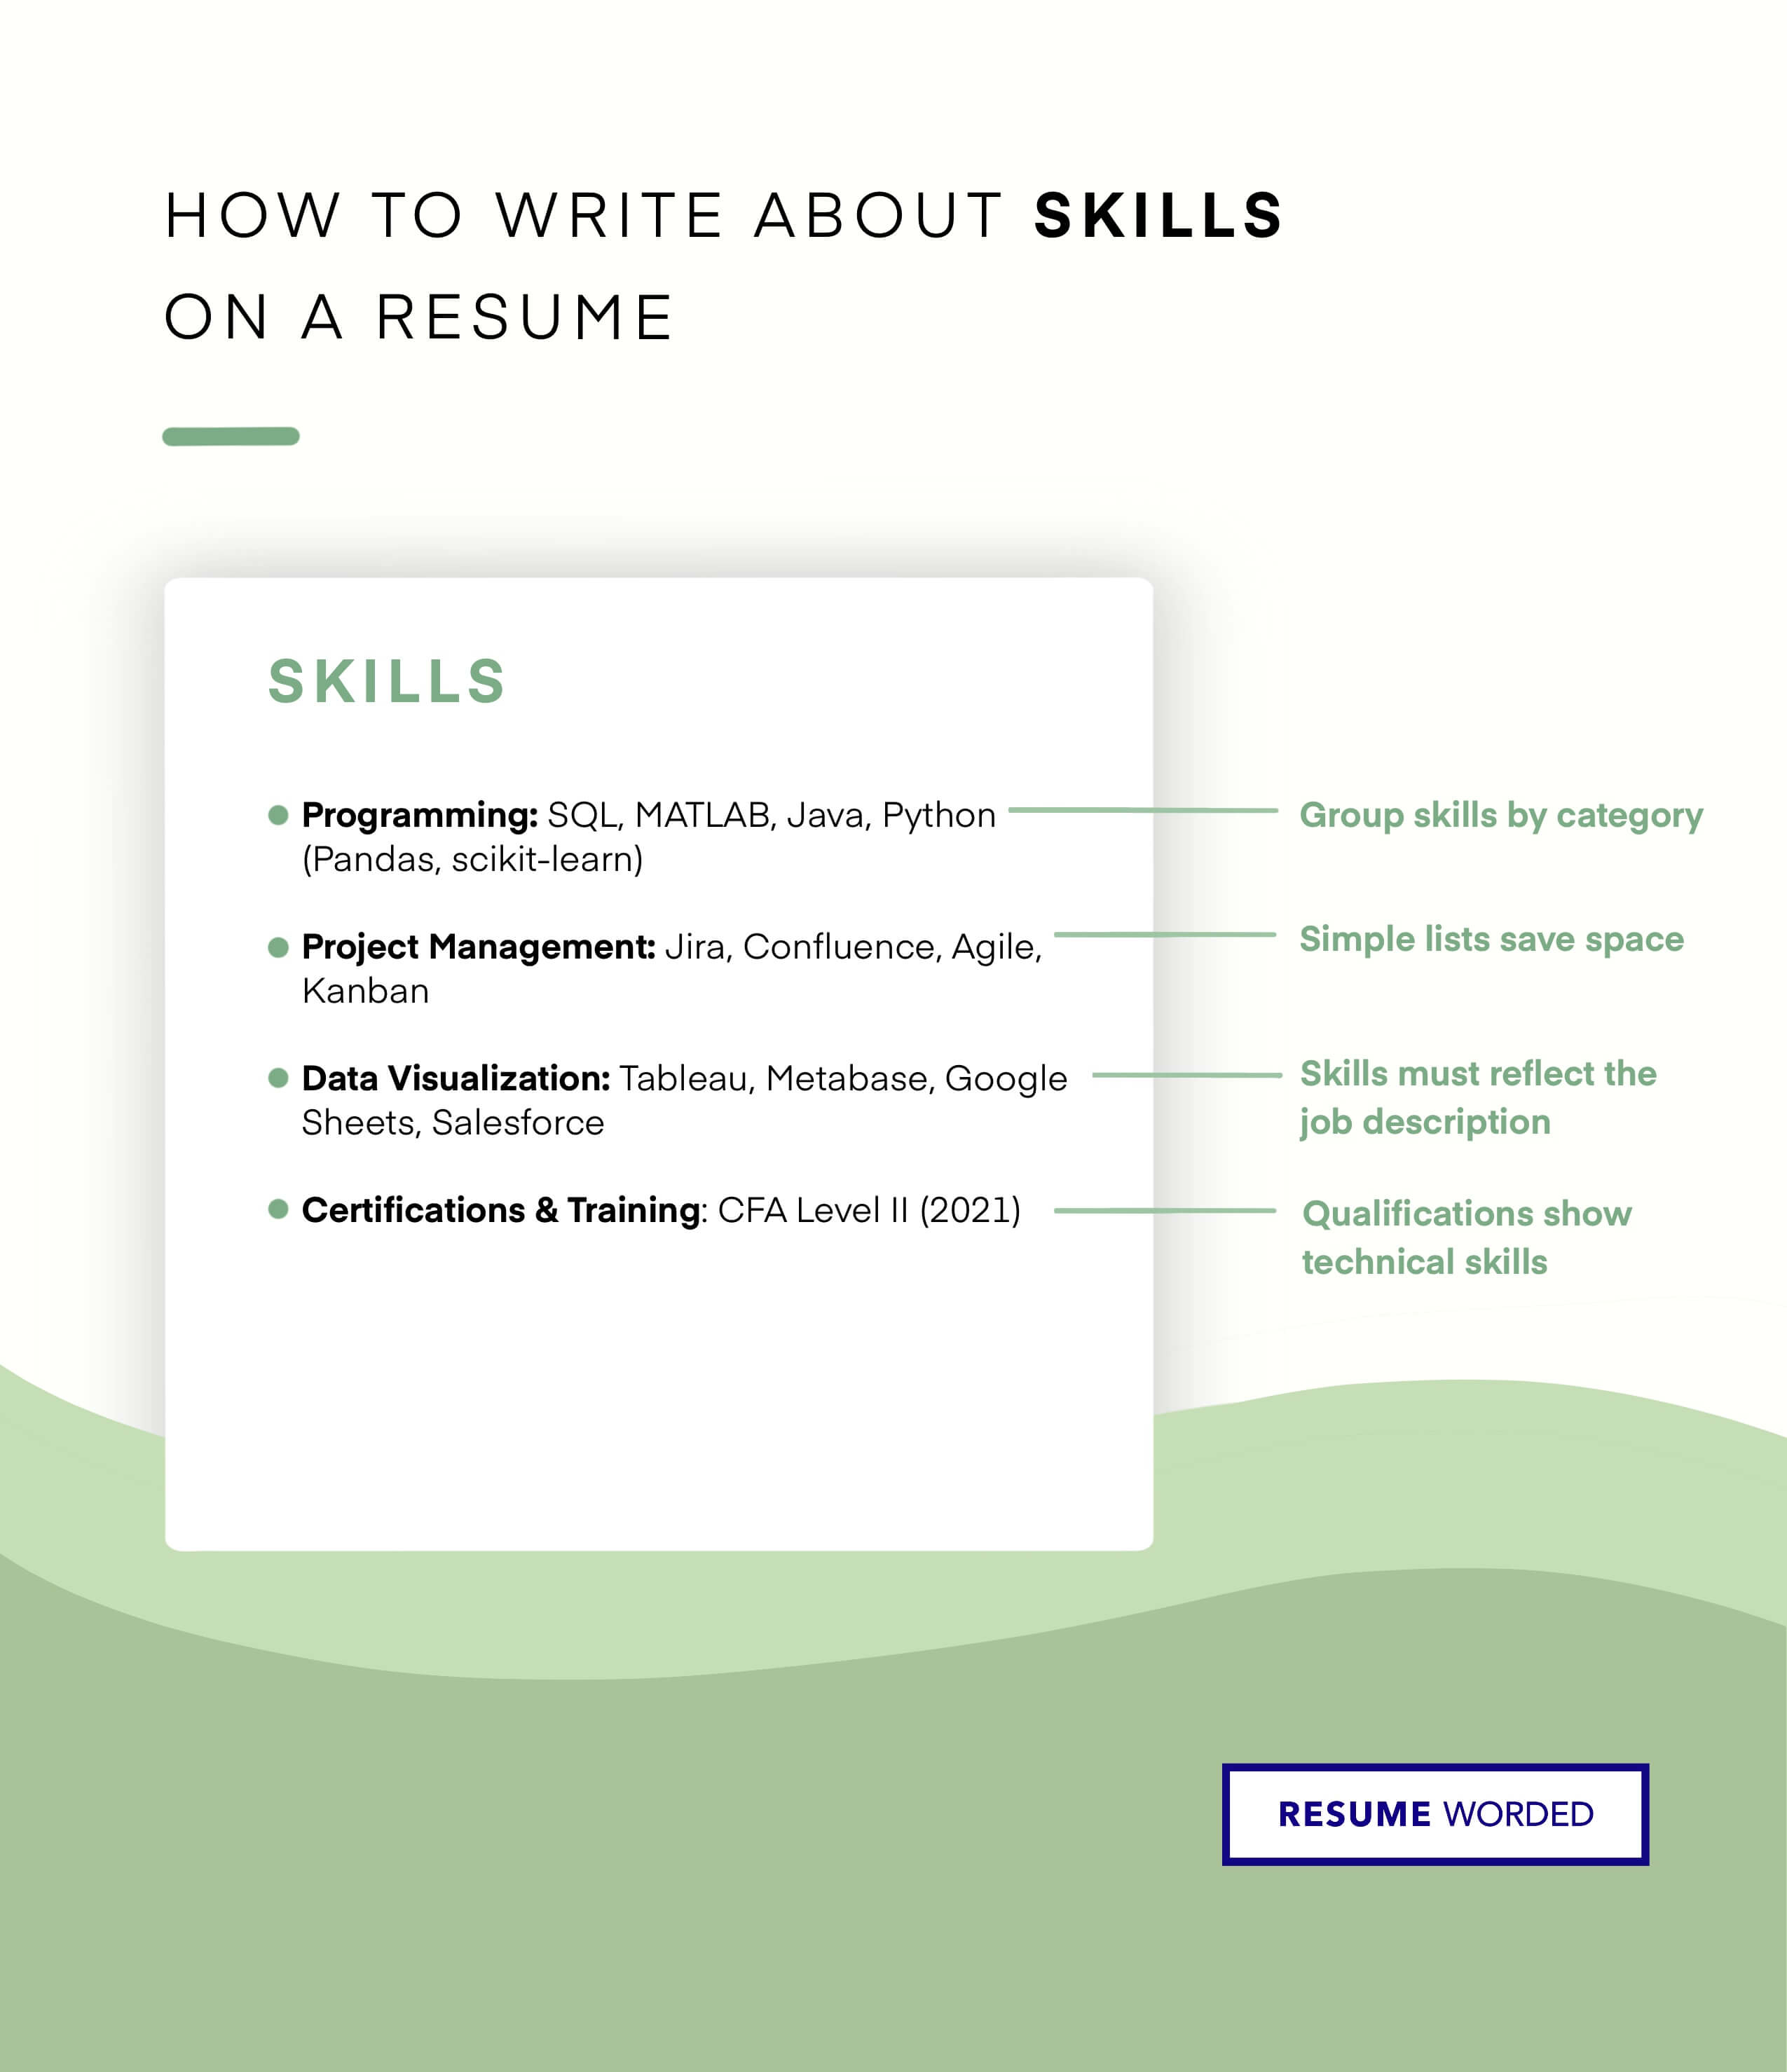 Add a Skills section, and include hard skills